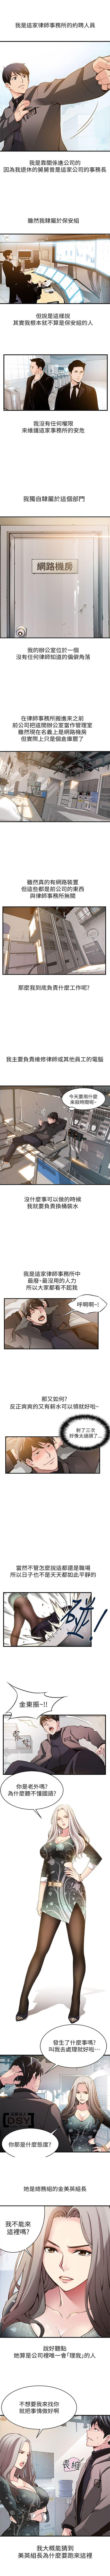 Wanking 弱點 1-101 官方中文（連載中） Chastity - Page 5